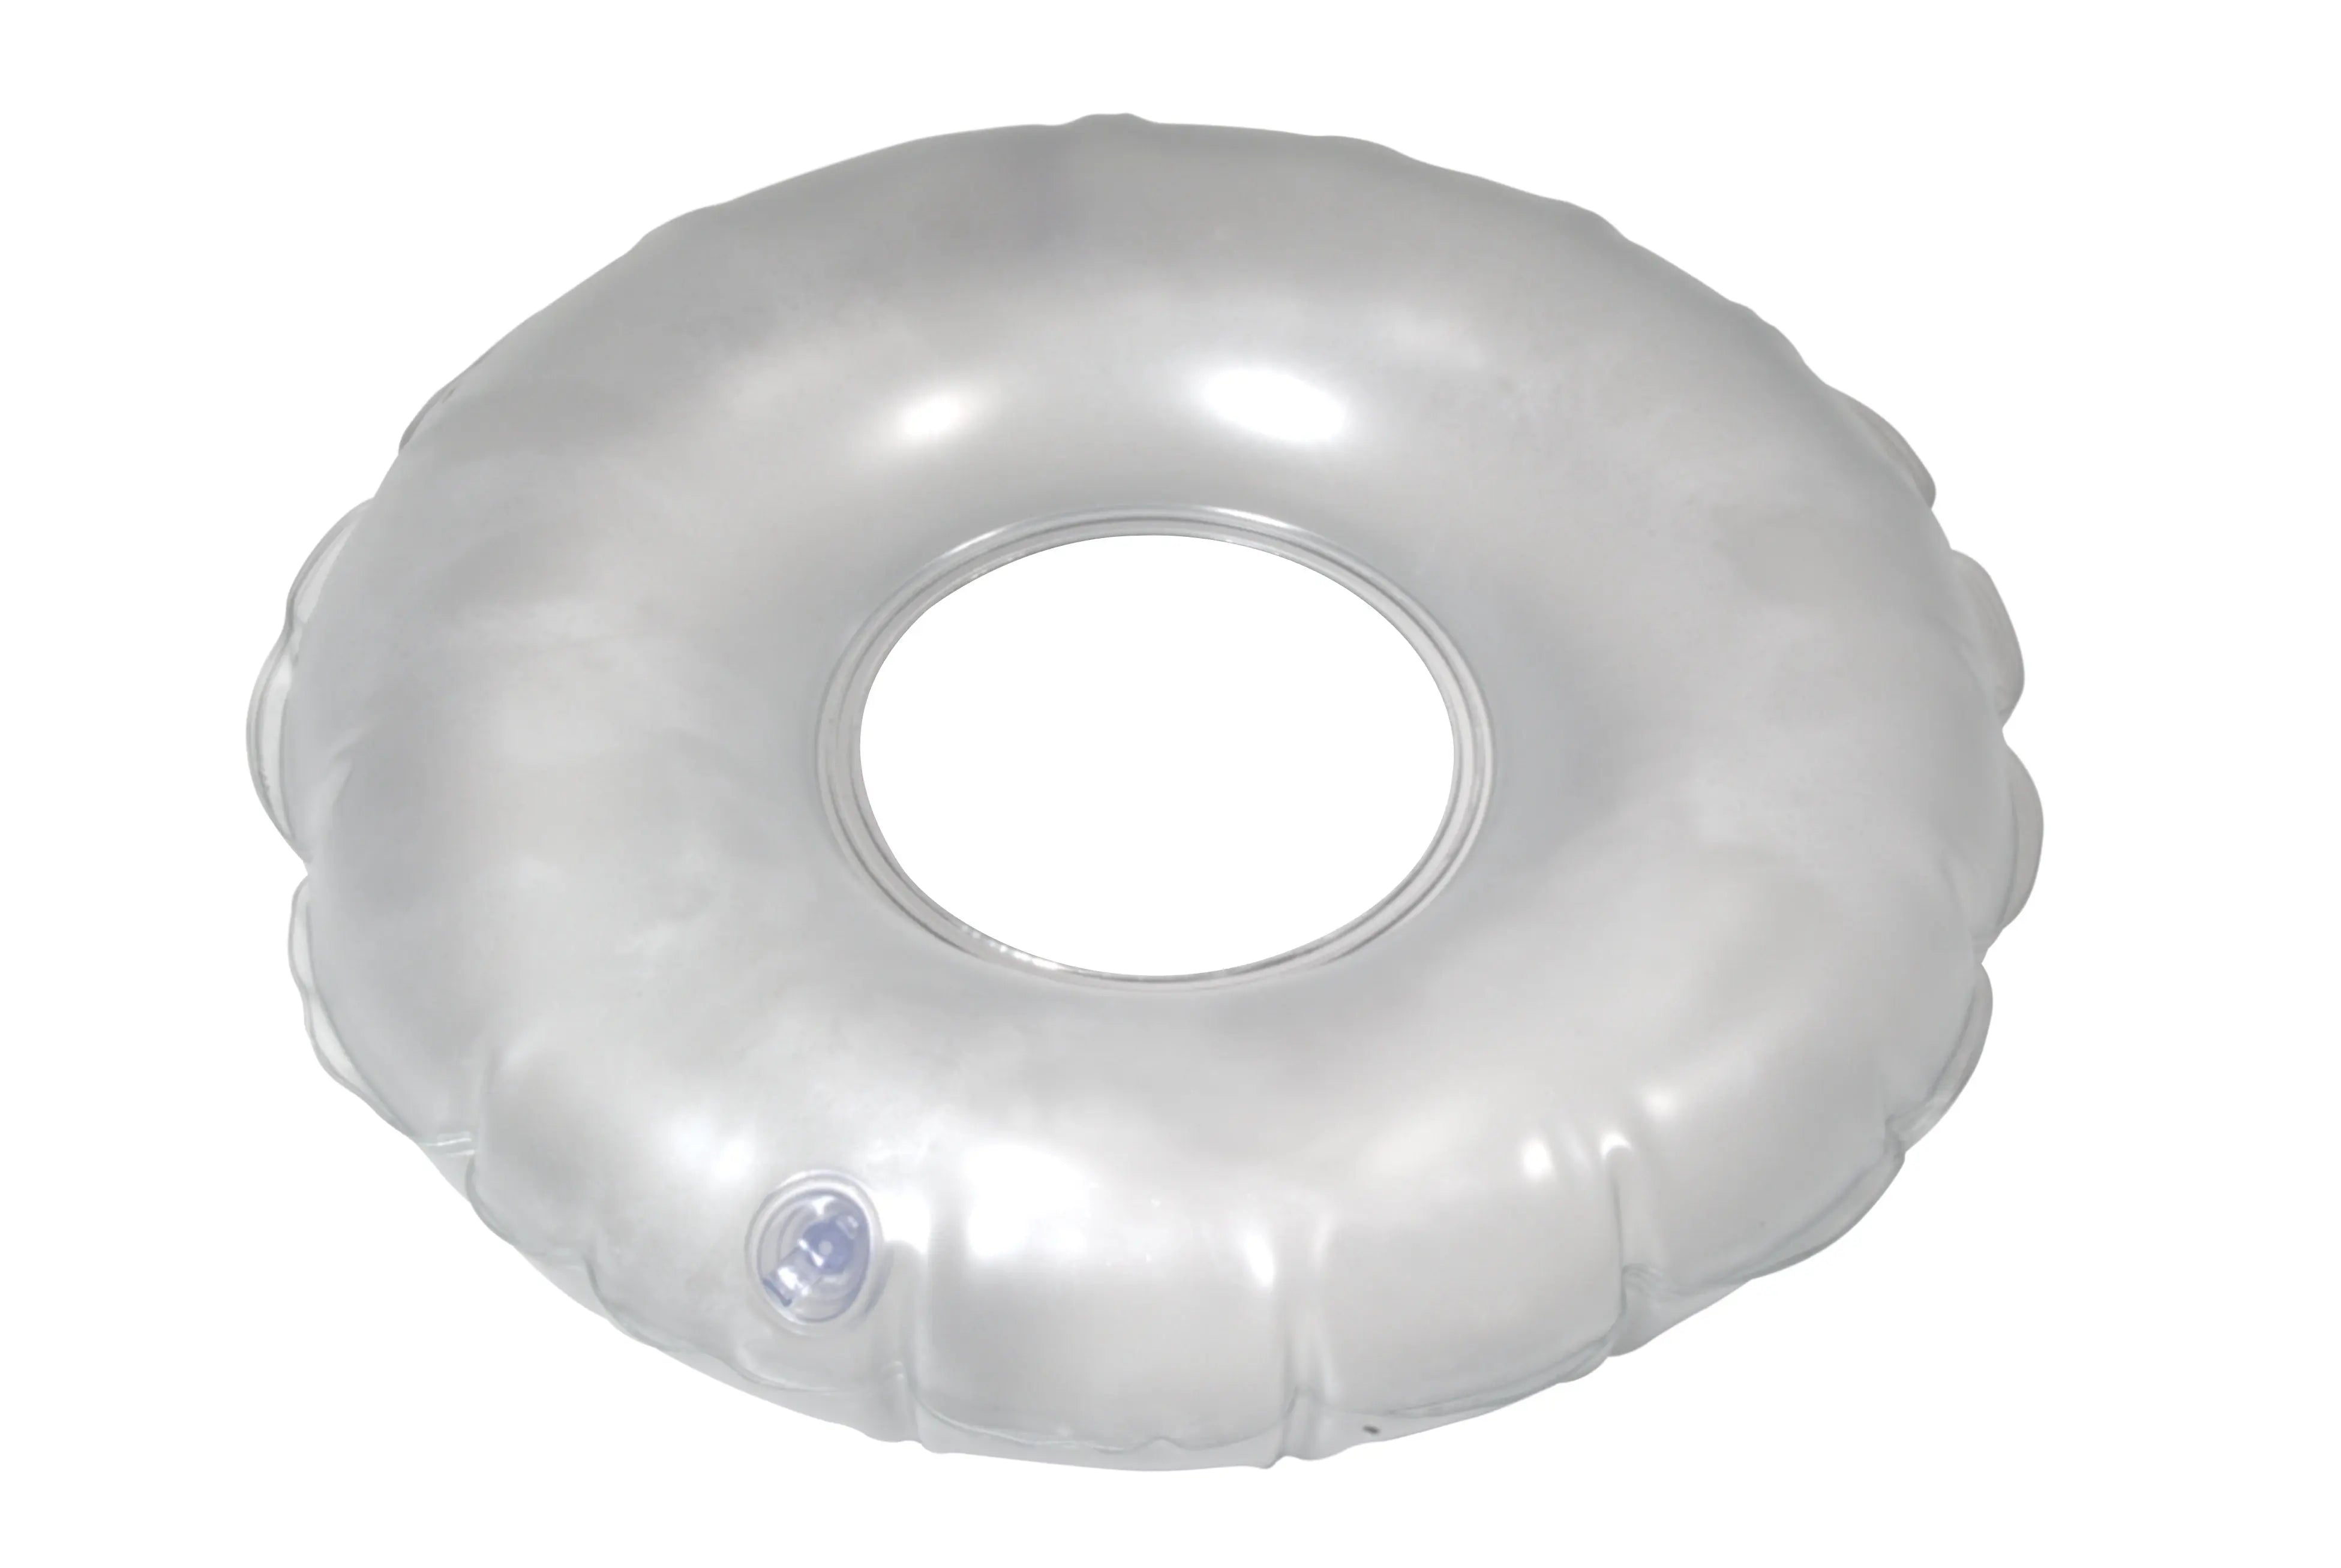 Inflatable Vinyl Ring Cushion - Home Health Store Inc